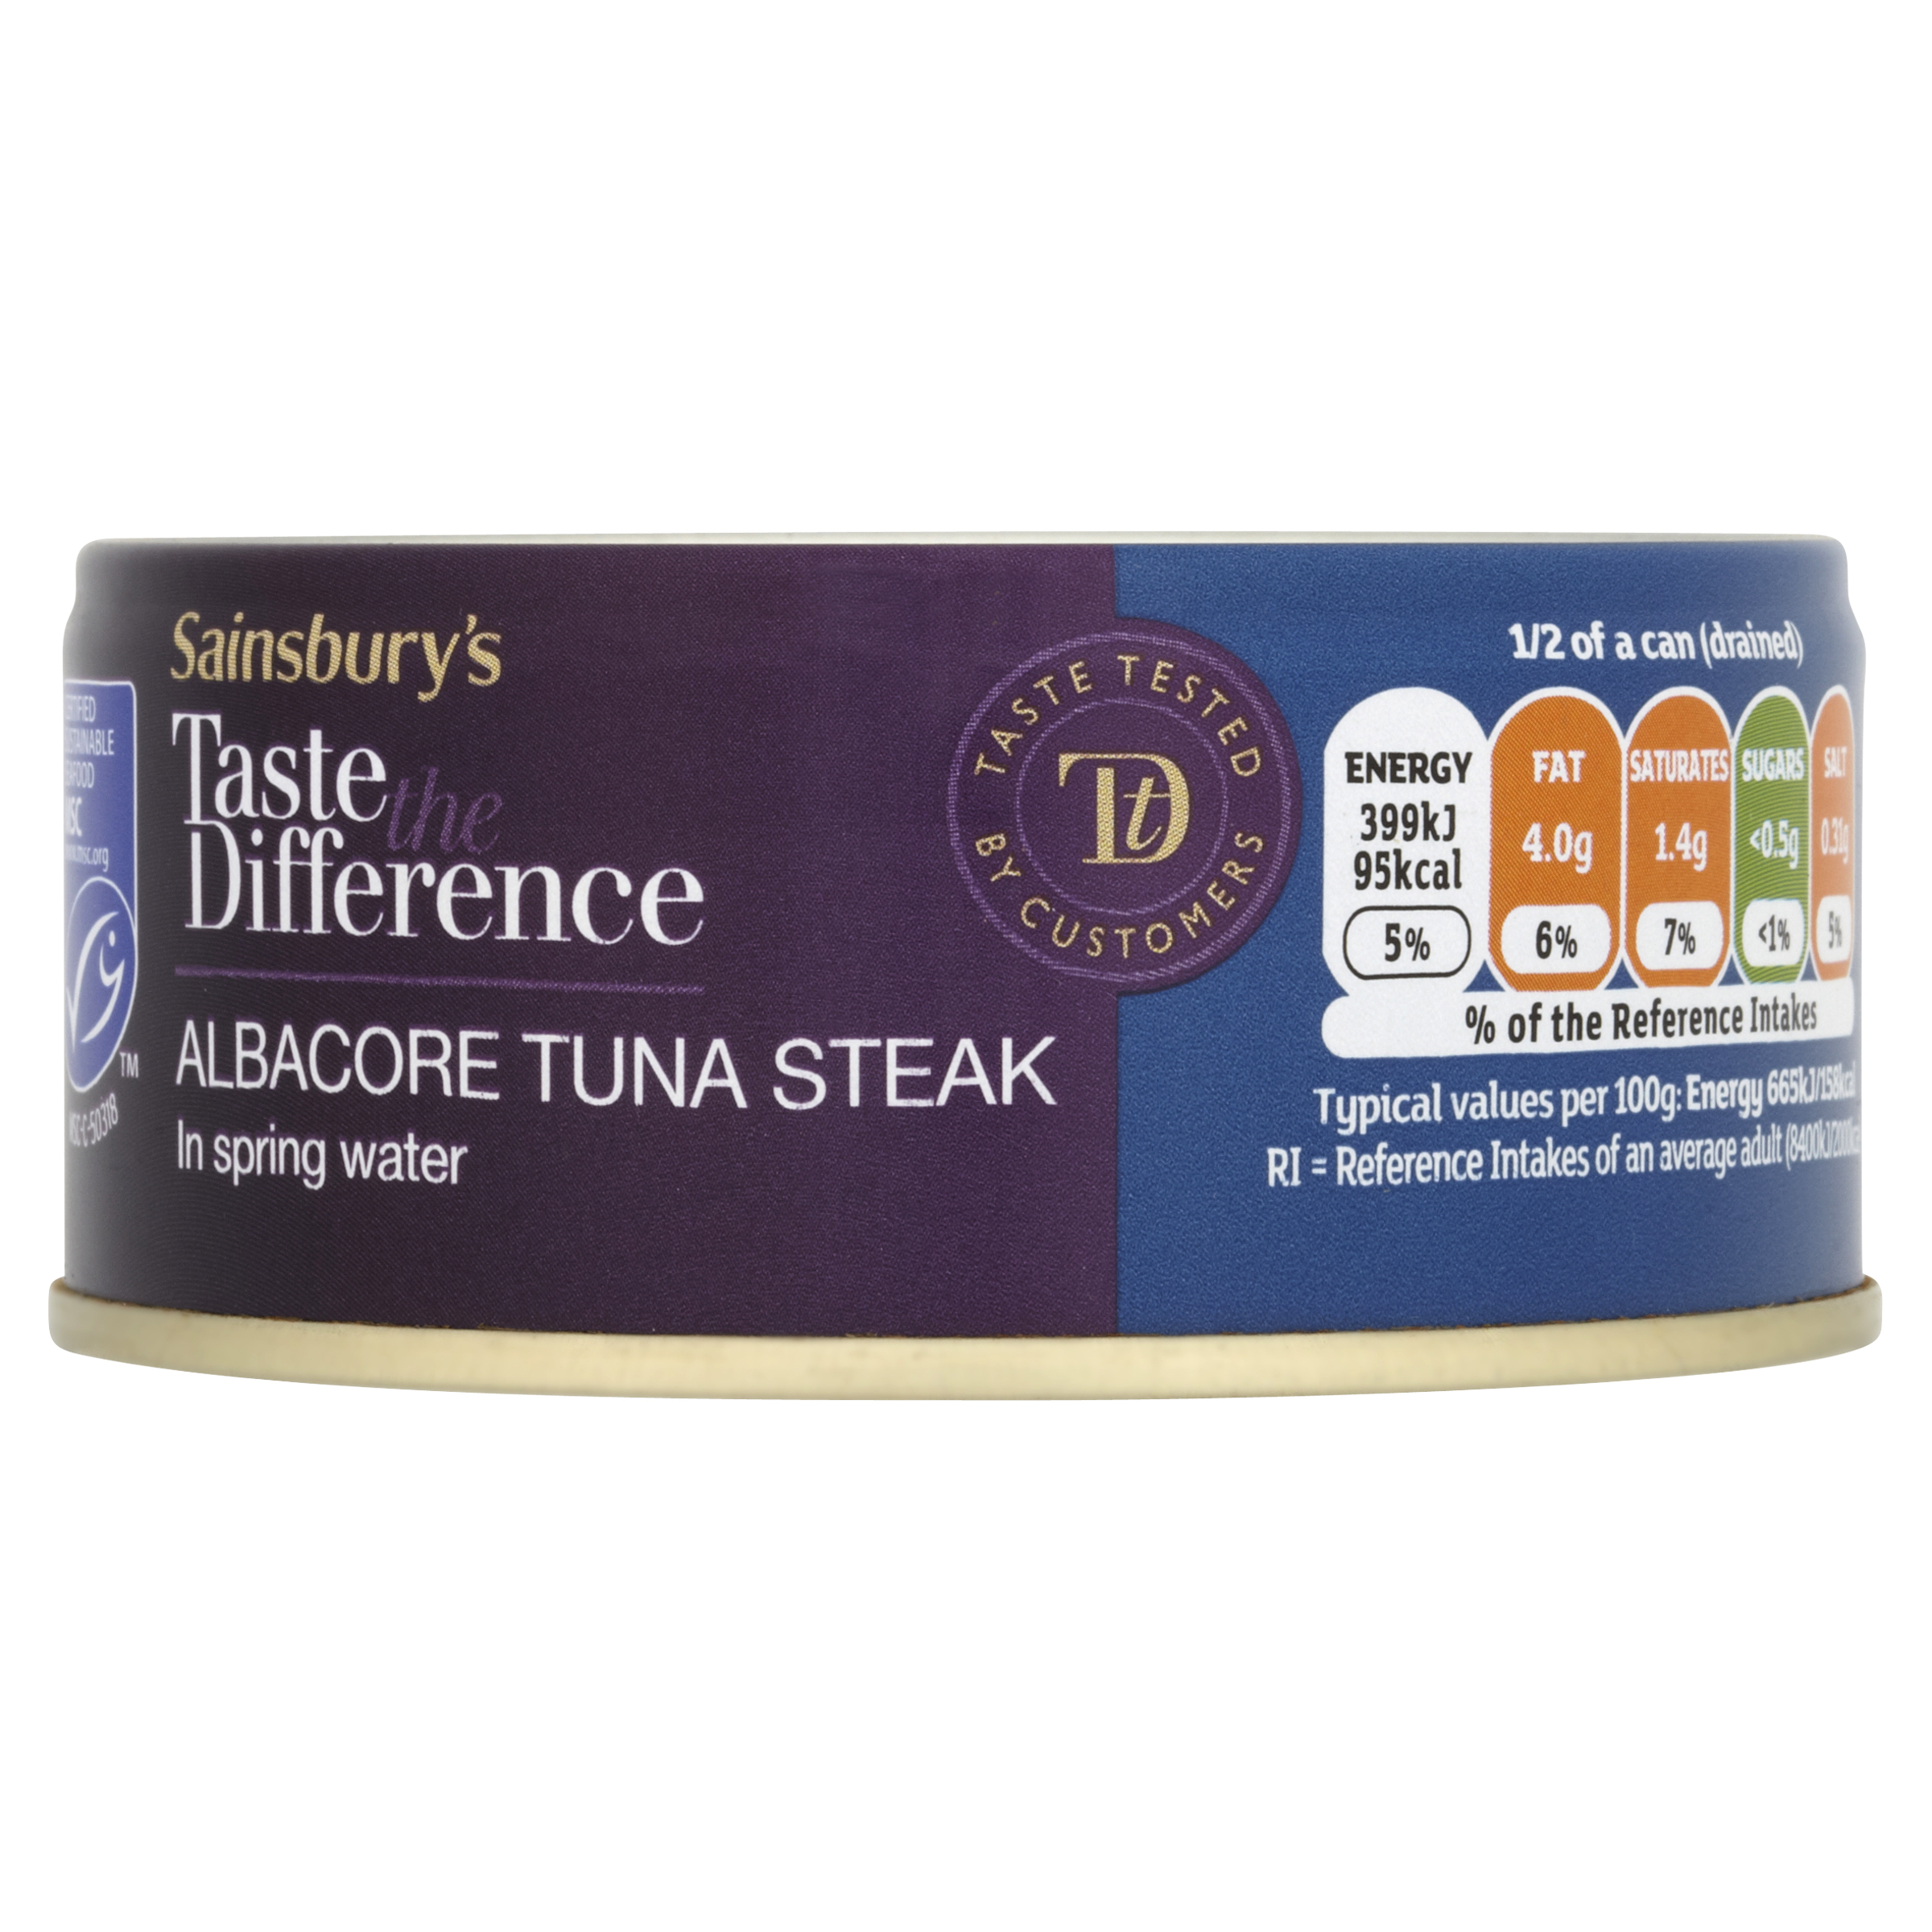 Albacore Tuna Steak In Spring Water, Taste the Difference 160g image